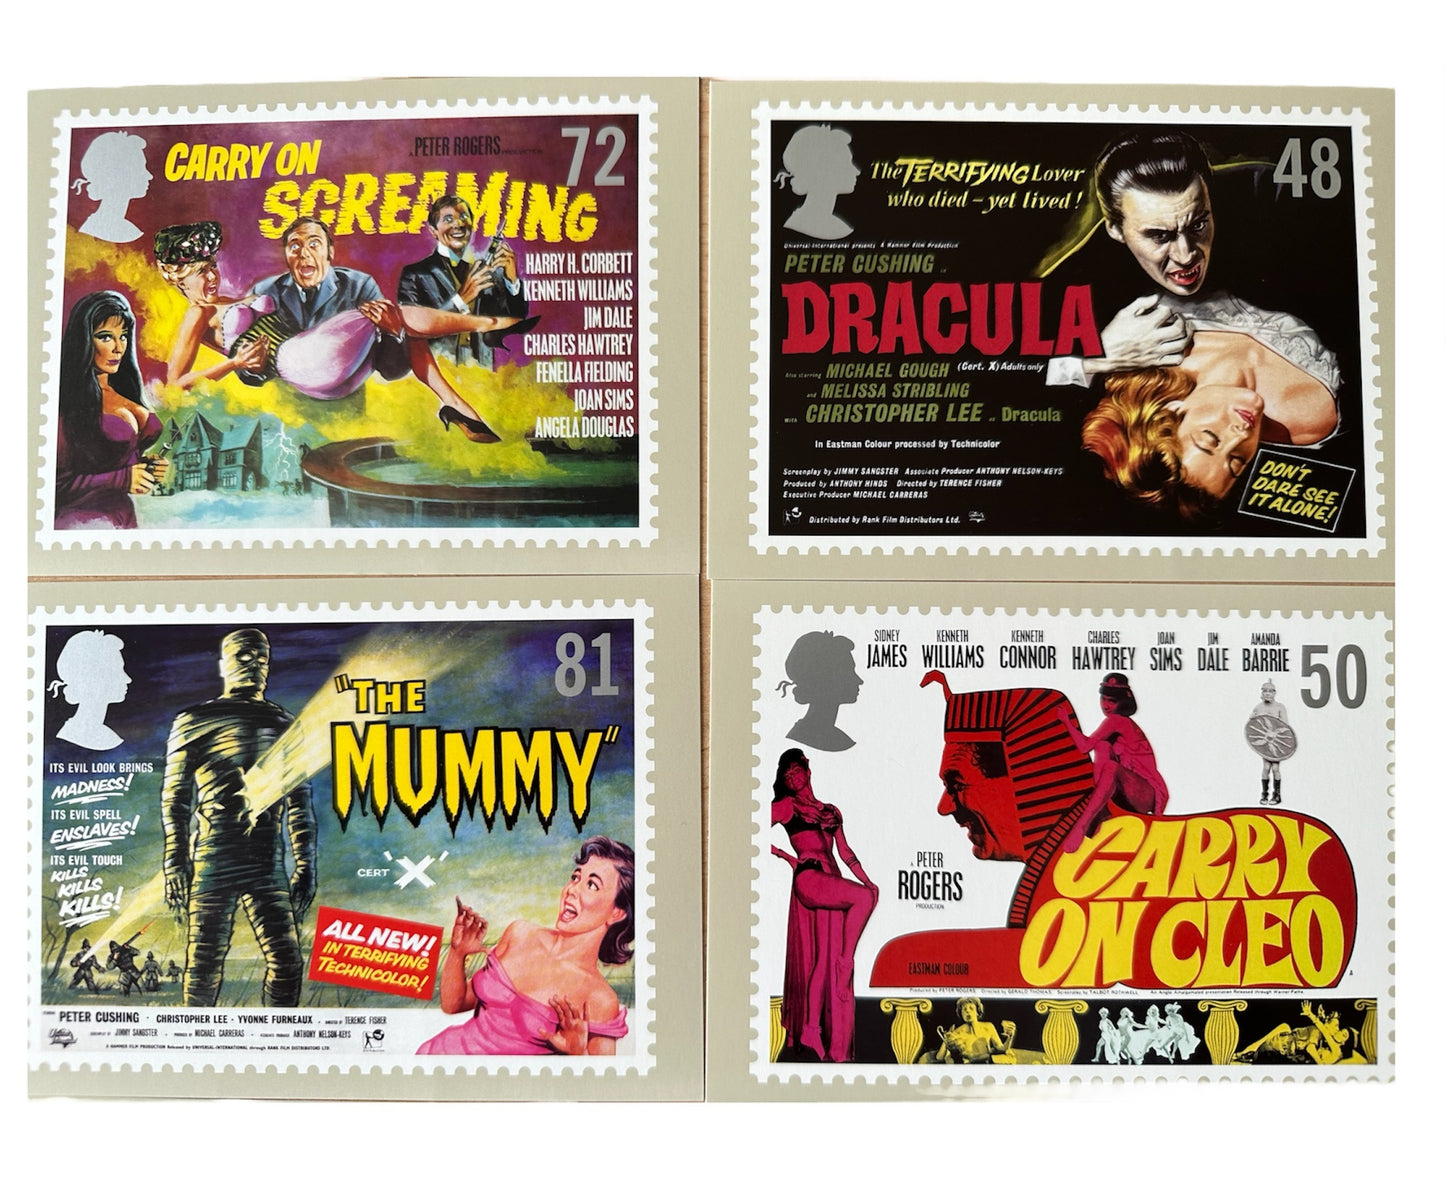 Vintage 2008 Classic Carry On And Hammer Films Limited Edition 6 Card Post Card Set - Brand New Shop Stock Room Find.